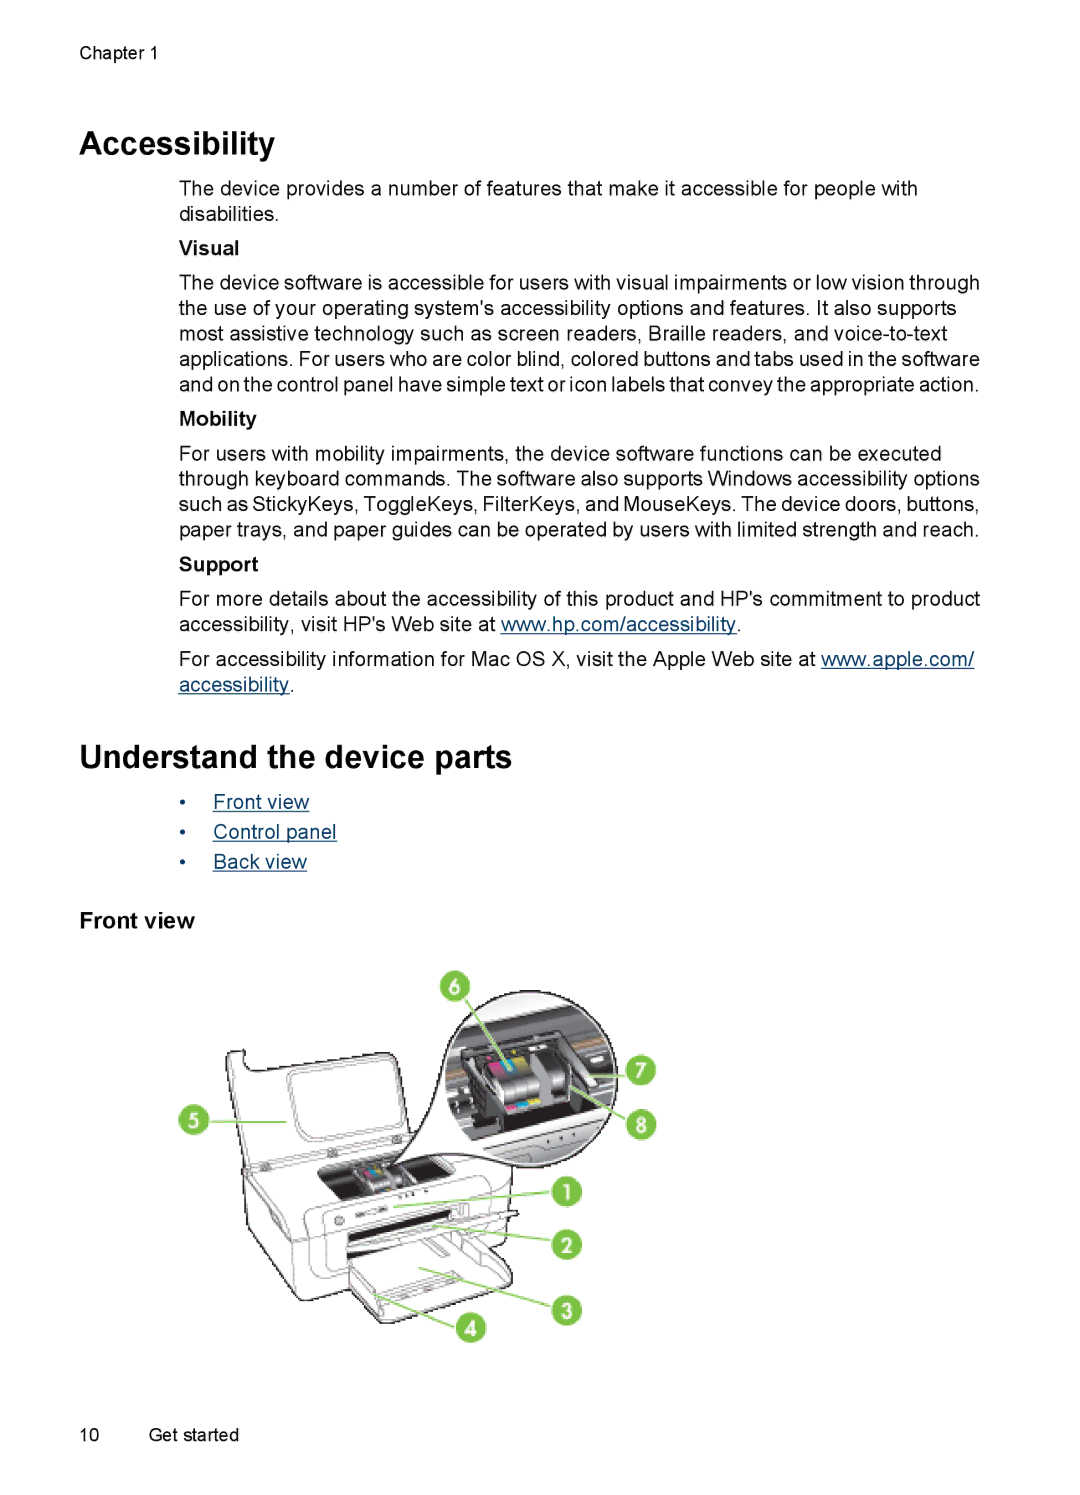 Hitachi E609, C9295A#B1H manual Accessibility, Understand the device parts, Front view 